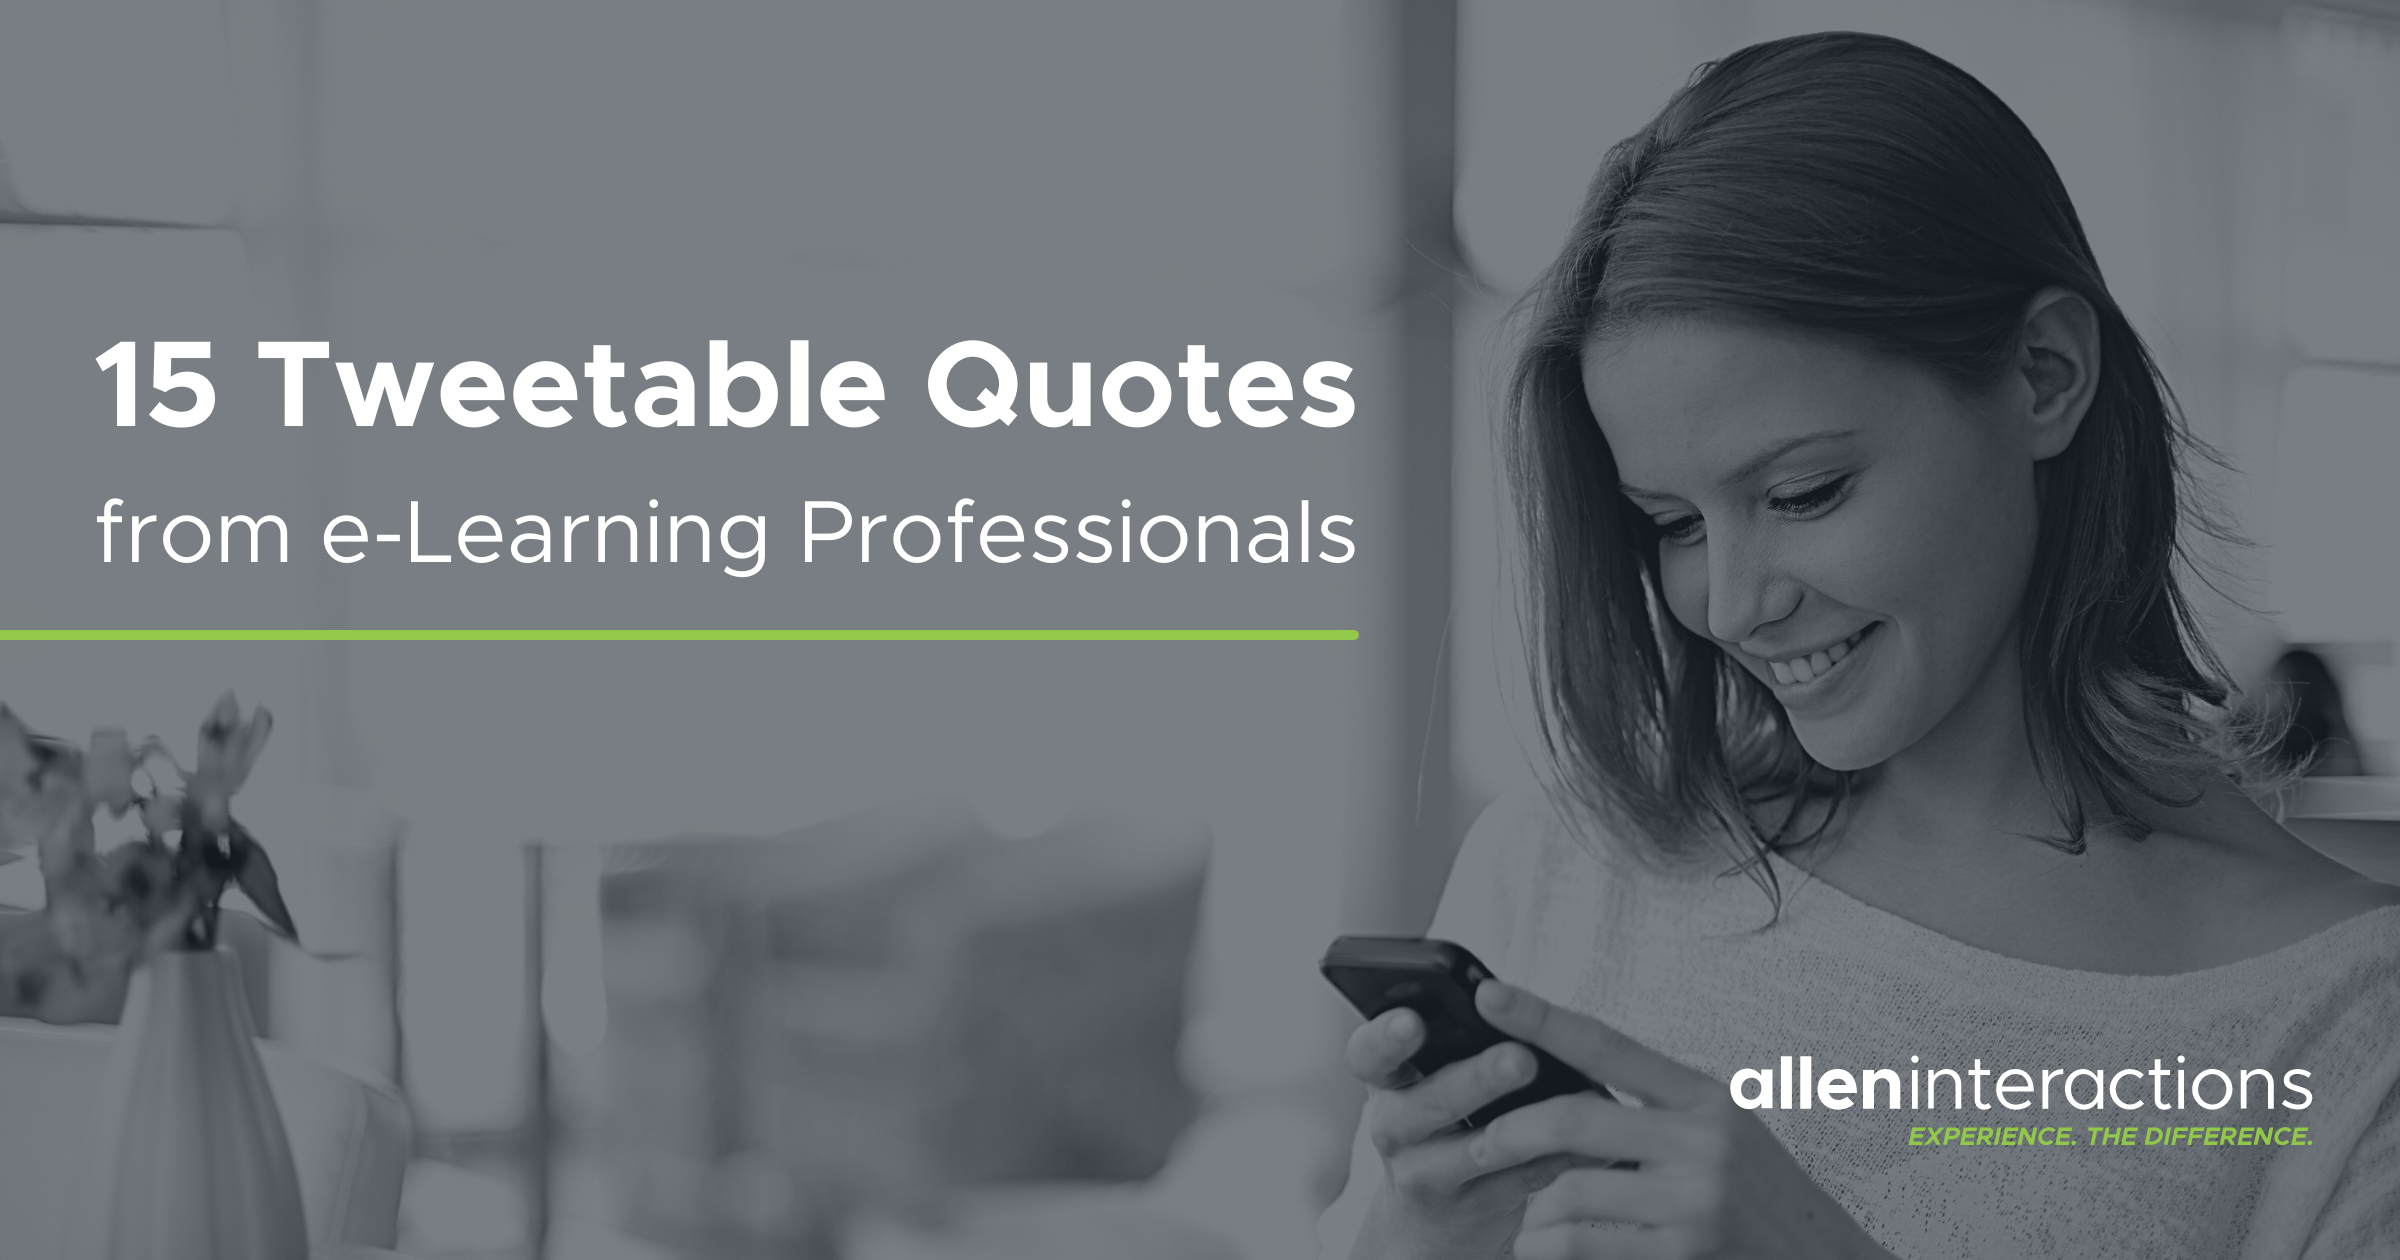 15 Tweetable Quotes from e-Learning Professionals